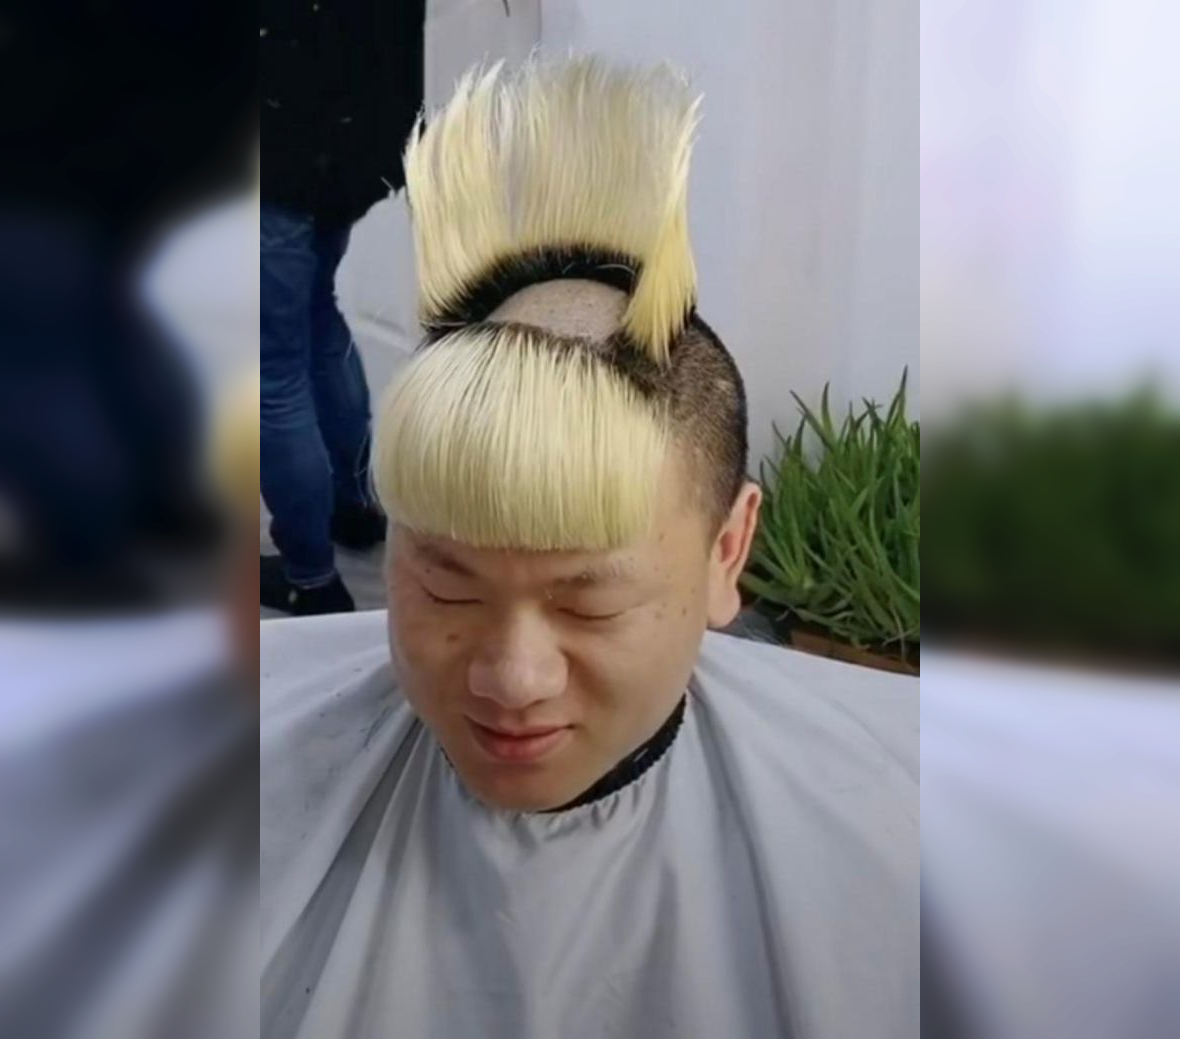 Hilarious Hairdos: When Salon Sessions Turn Silly